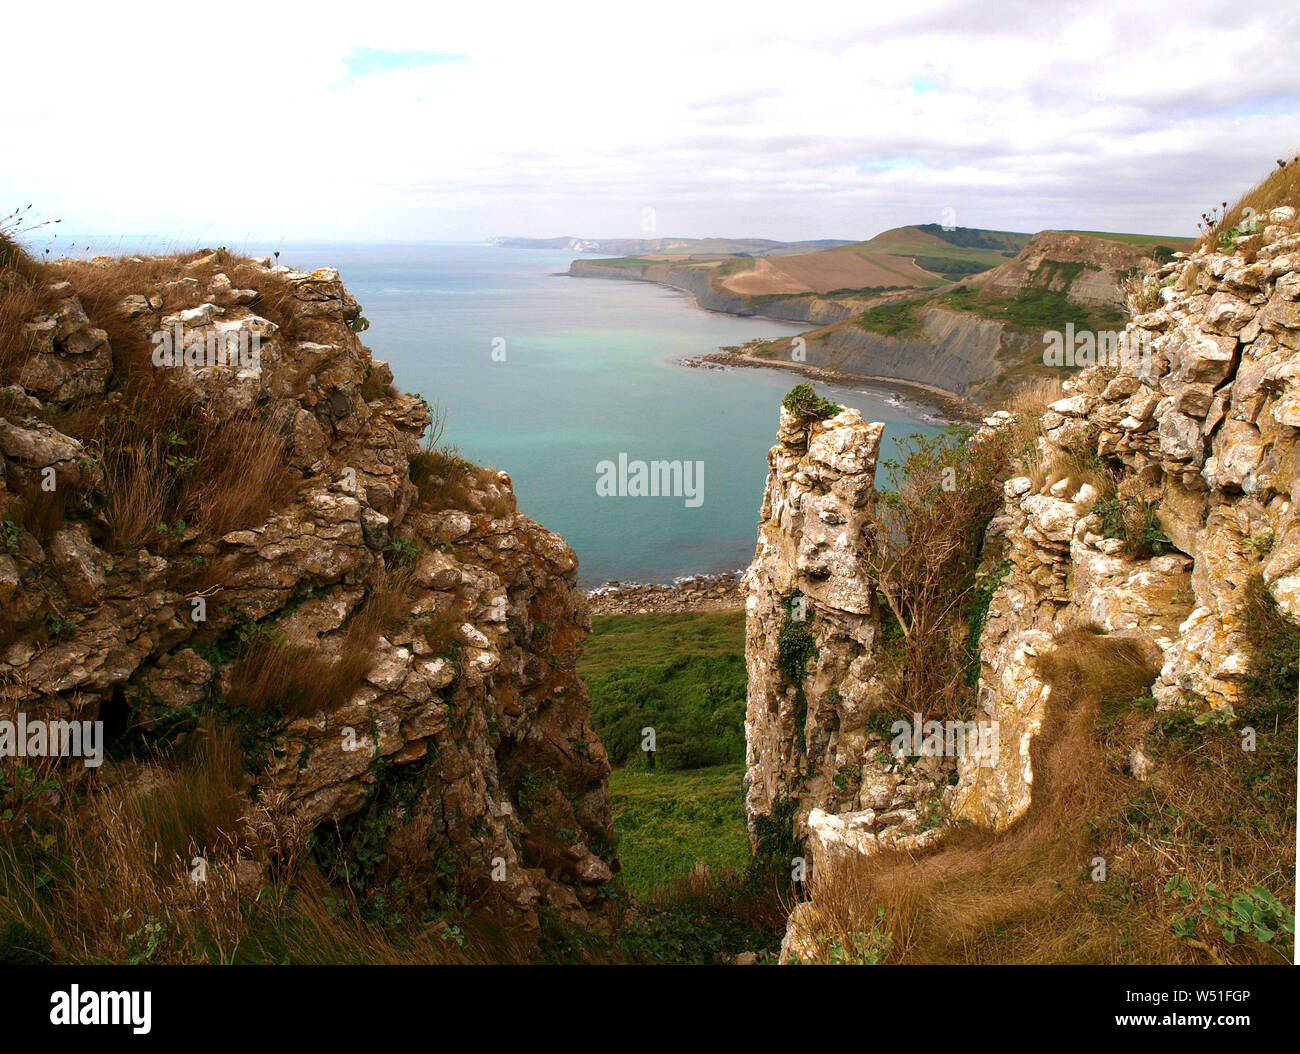 The view through the rocky outcrop from the cliff top above Chapmans Pool near Worth Matravers in Dorset, UK with the Jurassic coastline in the backgr Stock Photo